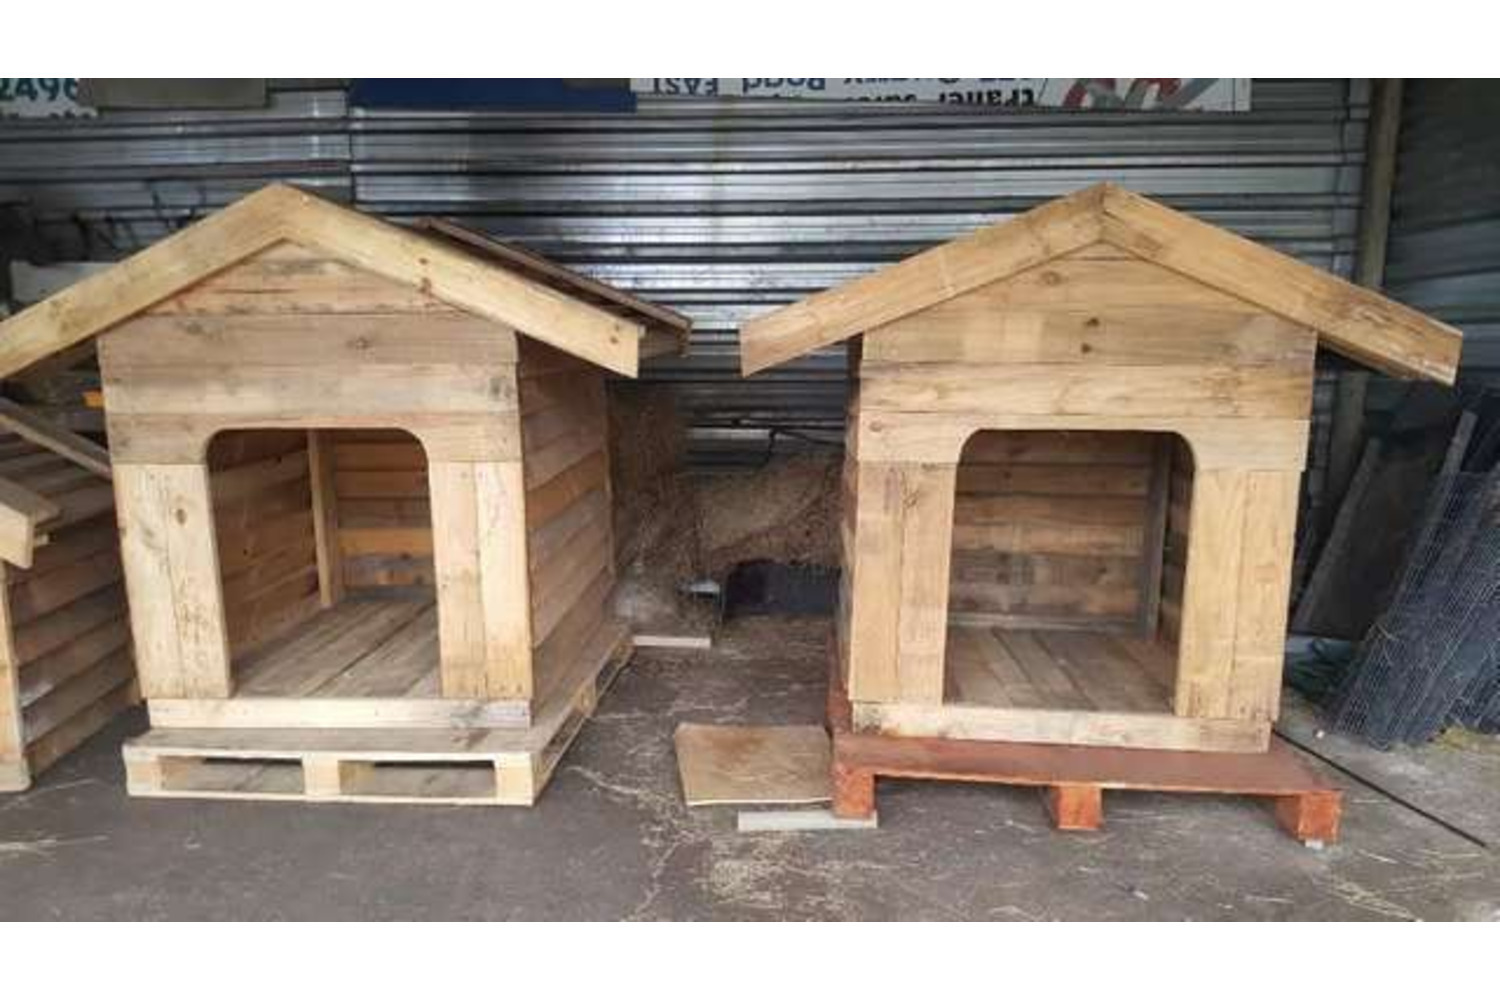 Kennels for large breed dogs